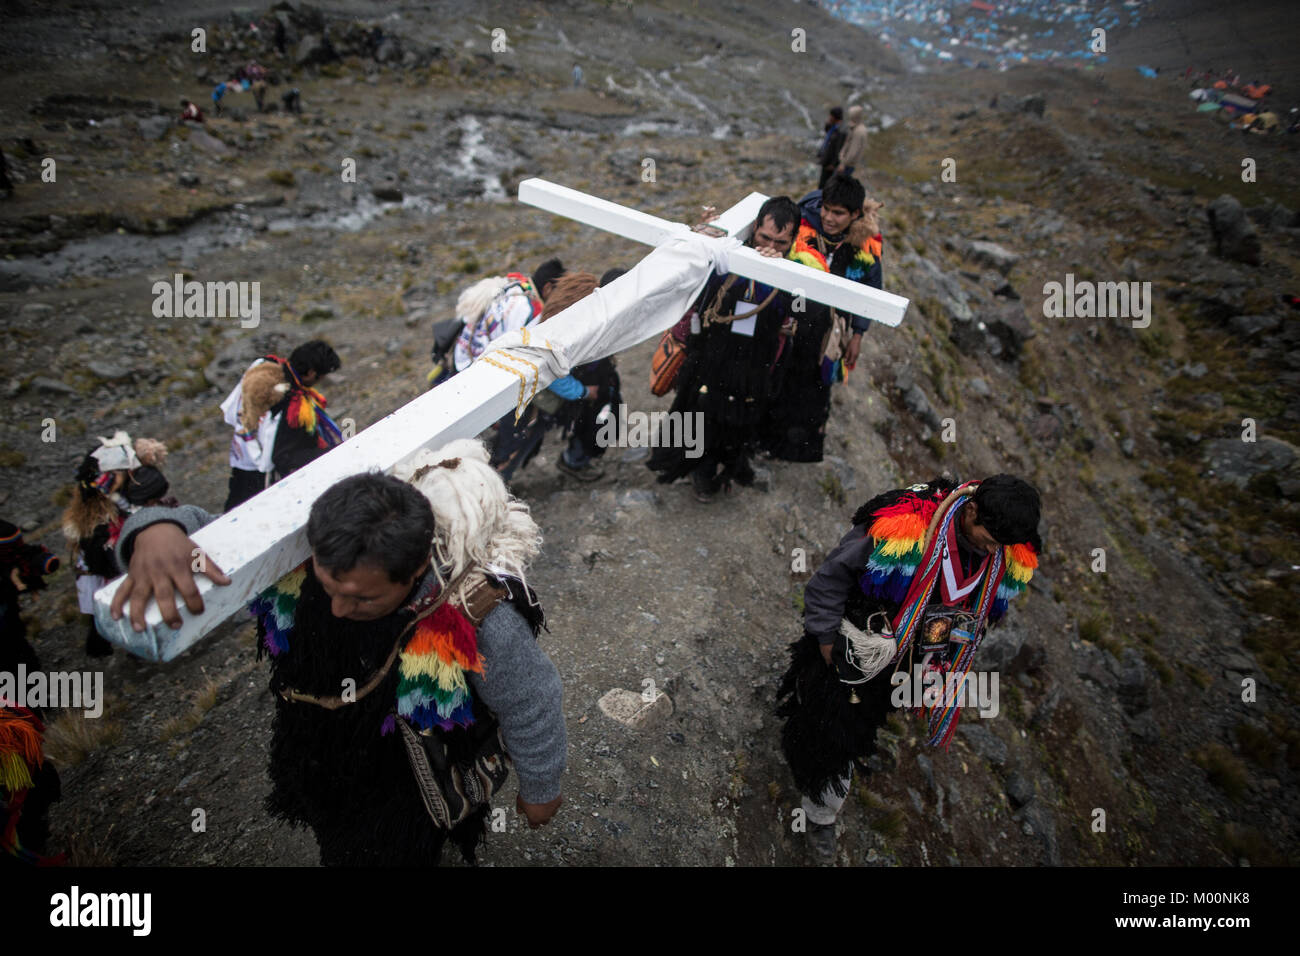 Cusco, Peru. 29th Dec, 2017. Members of the Urubamba nation, ascend to Ausangate Mountain, at 6362m, carrying their cross to be blessed by the Lord of Qoyllur Riti.The pilgrimage includes processions with crosses that climb to the snowy summit of the mountain and then descend the next day.Quyllur Rit'i or Star Snow Festival is a spiritual and religious festival held Annually at the Sinakara Valley in the Cusco Region of Peru. Groups of Quero indigenous people climb Ausangate Mountain, at 6362m, in search of the Snow Star Which is reputedly buried Within the mountain.According to the ch Stock Photo